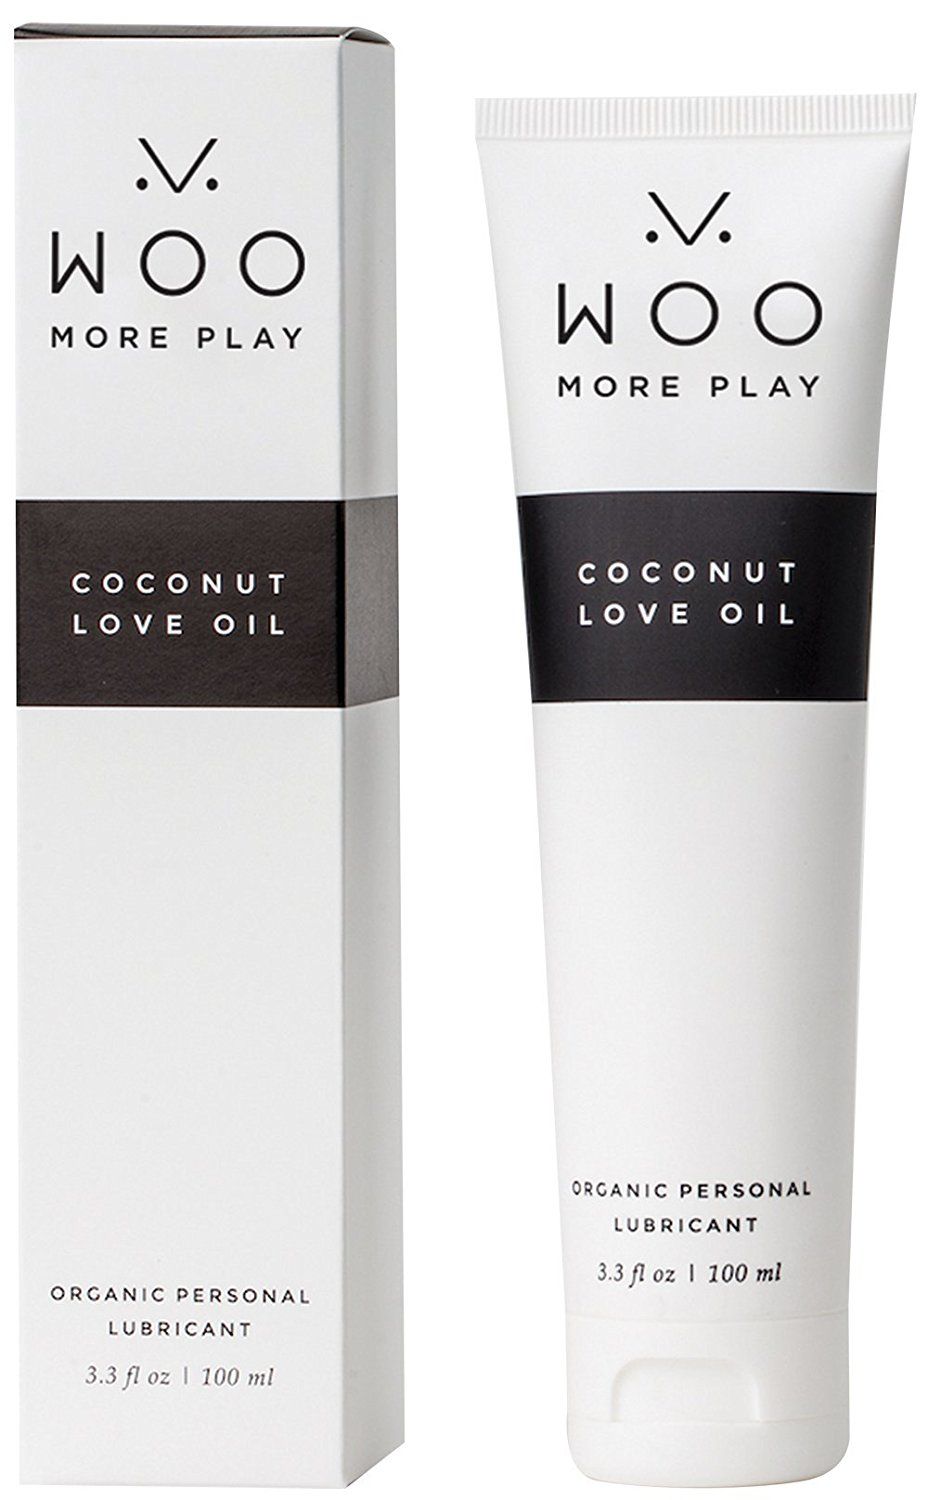  Woo More Play Coconut Love Oil (3.3 oz) 